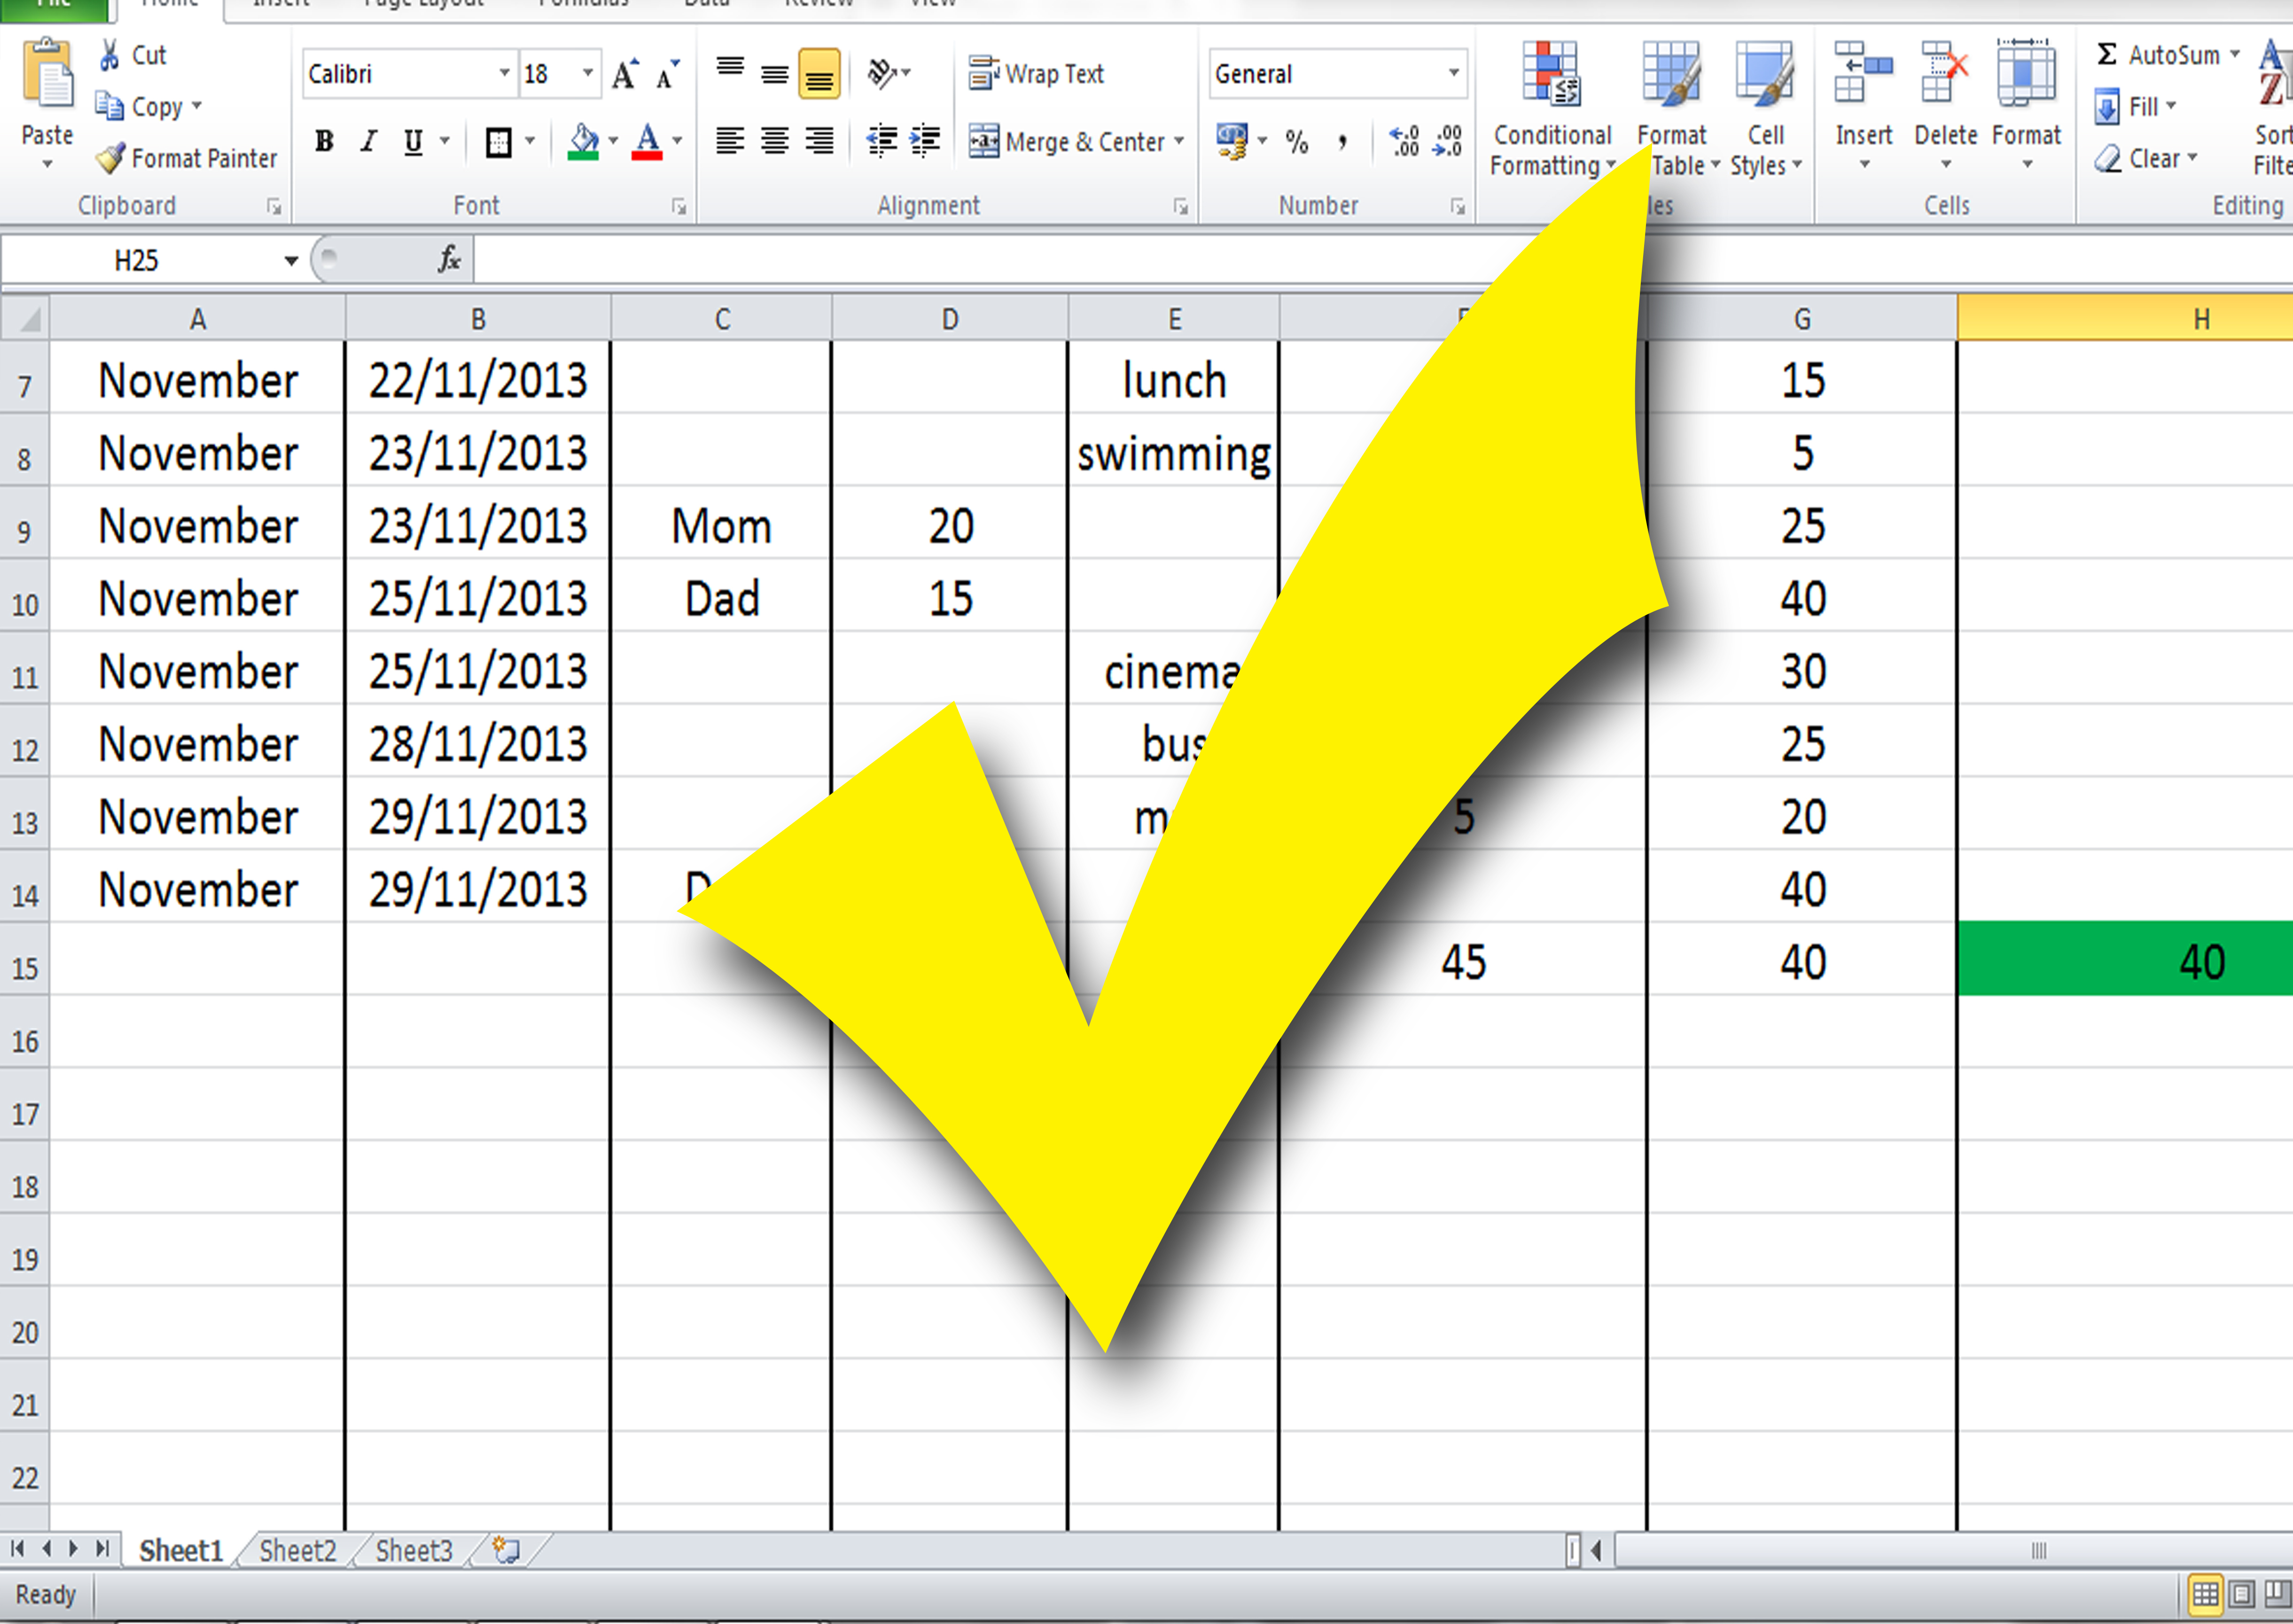 Building A Budget Spreadsheet Regarding How To Build A Budget Spreadsheet Teenagers: 13 Steps